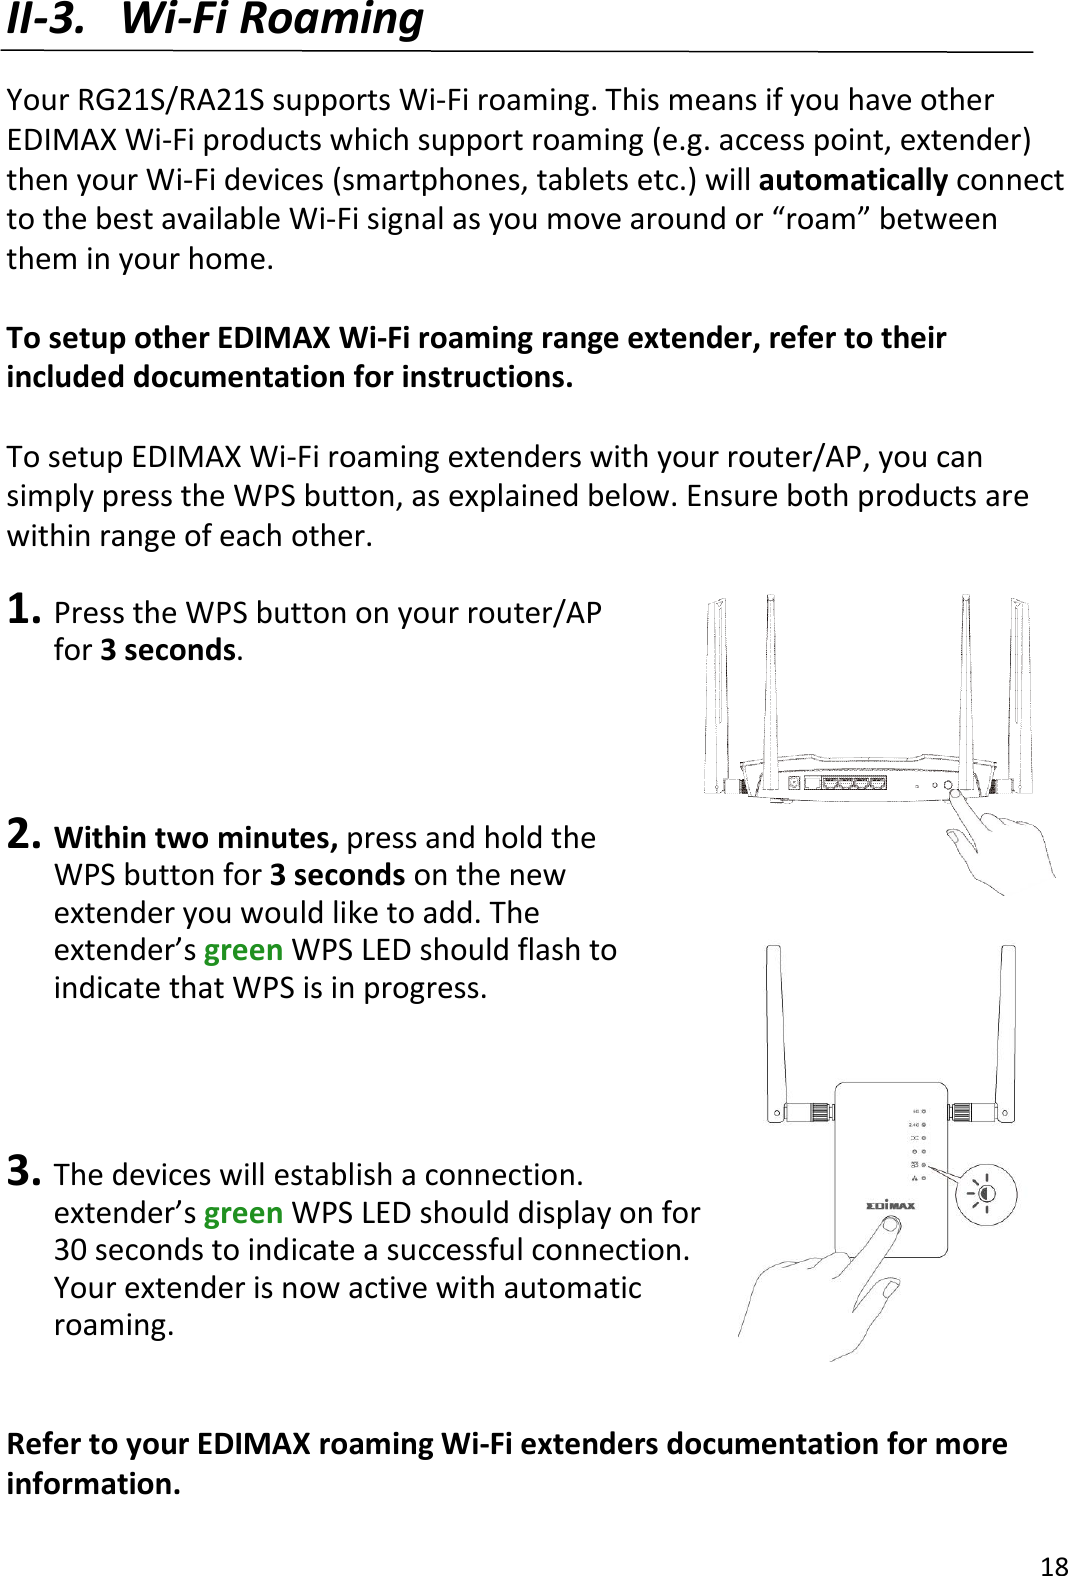 18  II-3. Wi-Fi Roaming  Your RG21S/RA21S supports Wi-Fi roaming. This means if you have other EDIMAX Wi-Fi products which support roaming (e.g. access point, extender) then your Wi-Fi devices (smartphones, tablets etc.) will automatically connect to the best available Wi-Fi signal as you move around or “roam” between them in your home.  To setup other EDIMAX Wi-Fi roaming range extender, refer to their included documentation for instructions.  To setup EDIMAX Wi-Fi roaming extenders with your router/AP, you can simply press the WPS button, as explained below. Ensure both products are within range of each other.  1. Press the WPS button on your router/AP for 3 seconds.      2. Within two minutes, press and hold the WPS button for 3 seconds on the new extender you would like to add. The extender’s green WPS LED should flash to indicate that WPS is in progress.     3. The devices will establish a connection.   extender’s green WPS LED should display on for 30 seconds to indicate a successful connection. Your extender is now active with automatic roaming.   Refer to your EDIMAX roaming Wi-Fi extenders documentation for more information. 